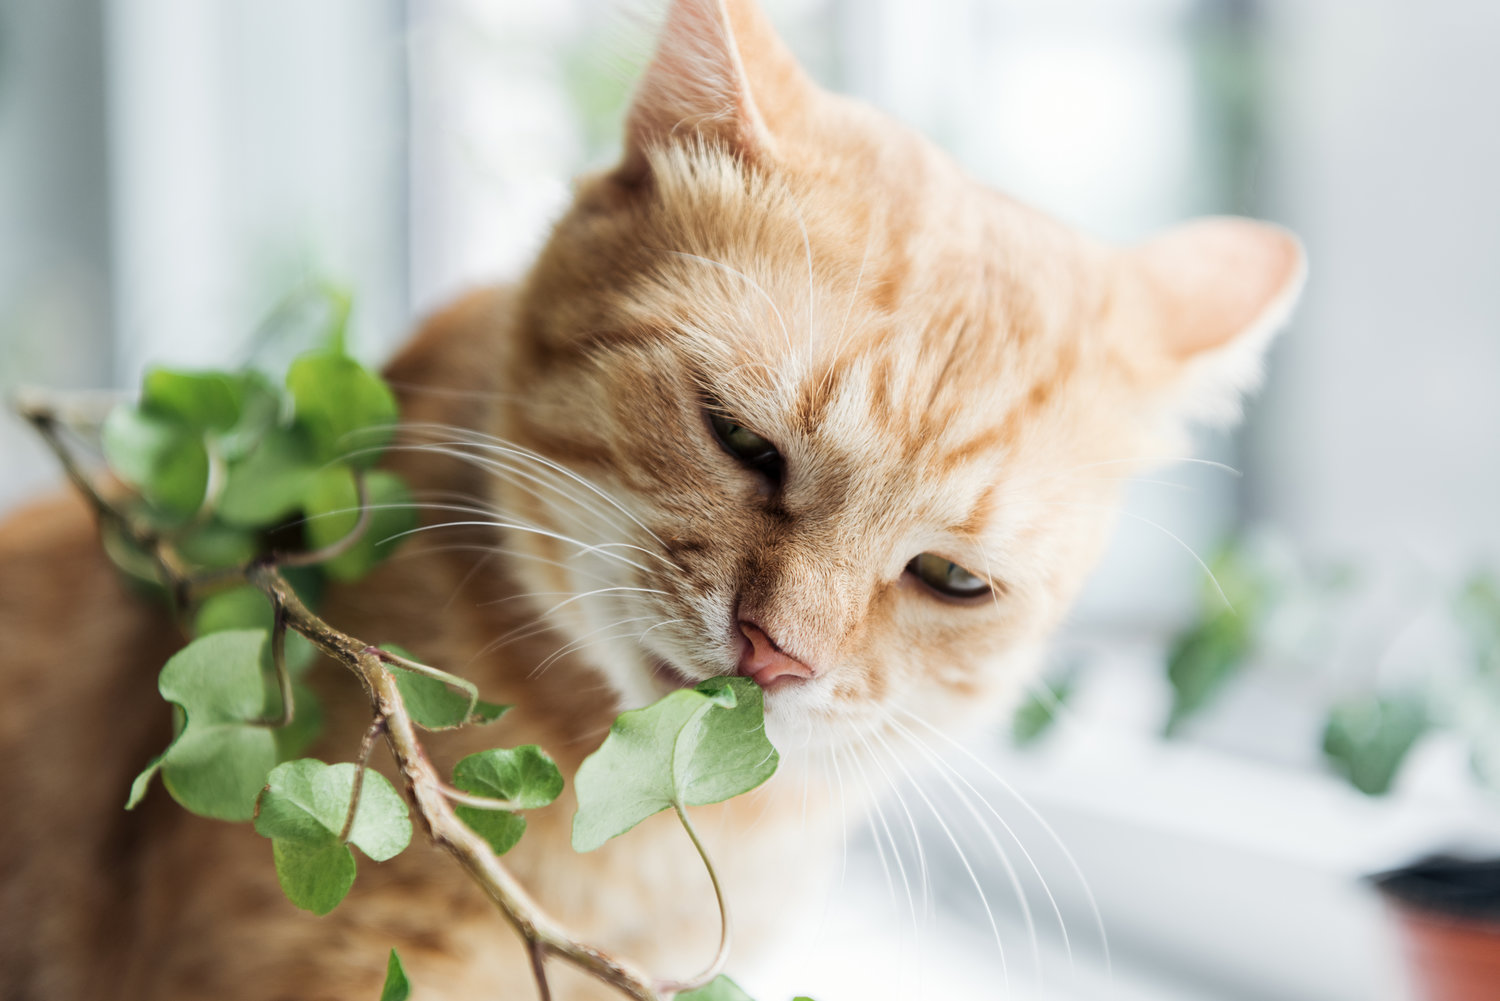 Close Up View Of Cute Red Cat Eating Green Houseplant